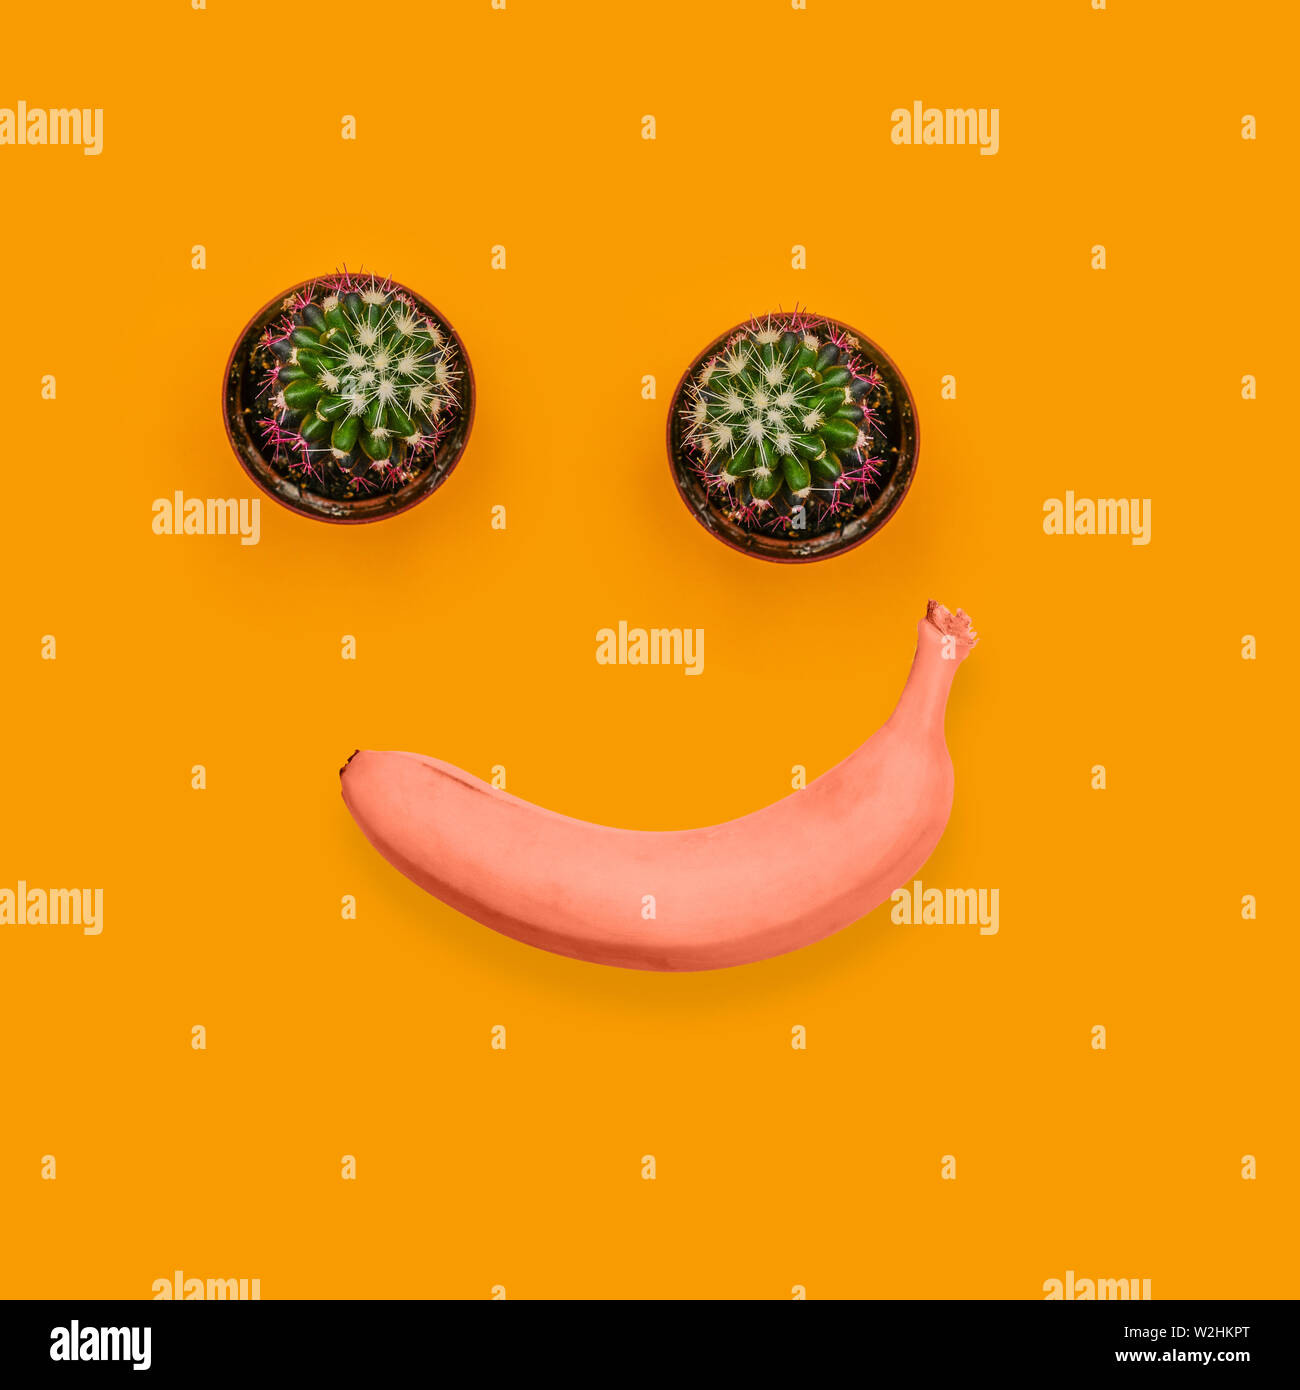 Two green cactus and red banana. Smiling, joyful face. Contemporary art collage. Fruits and plants. Stock Photo